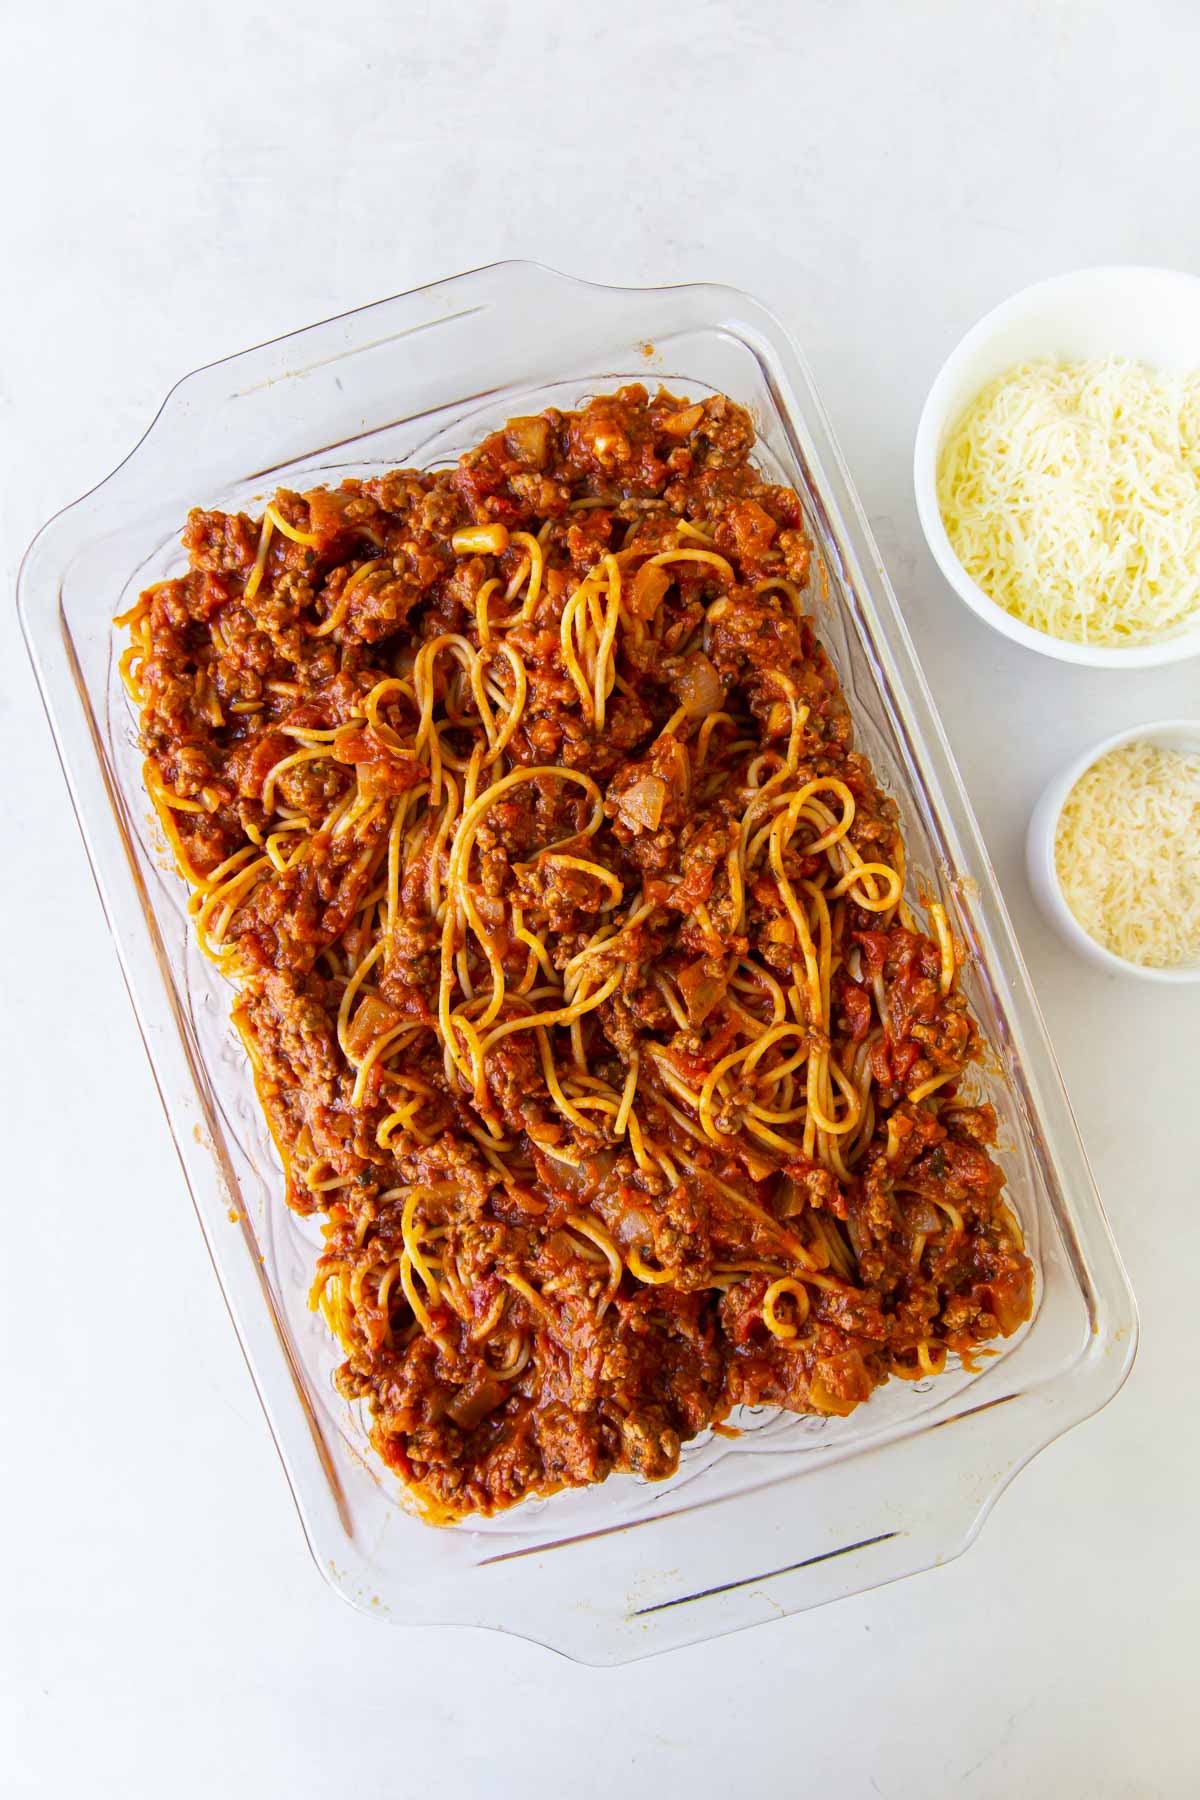 Spaghetti and meat sauce in baking dish.